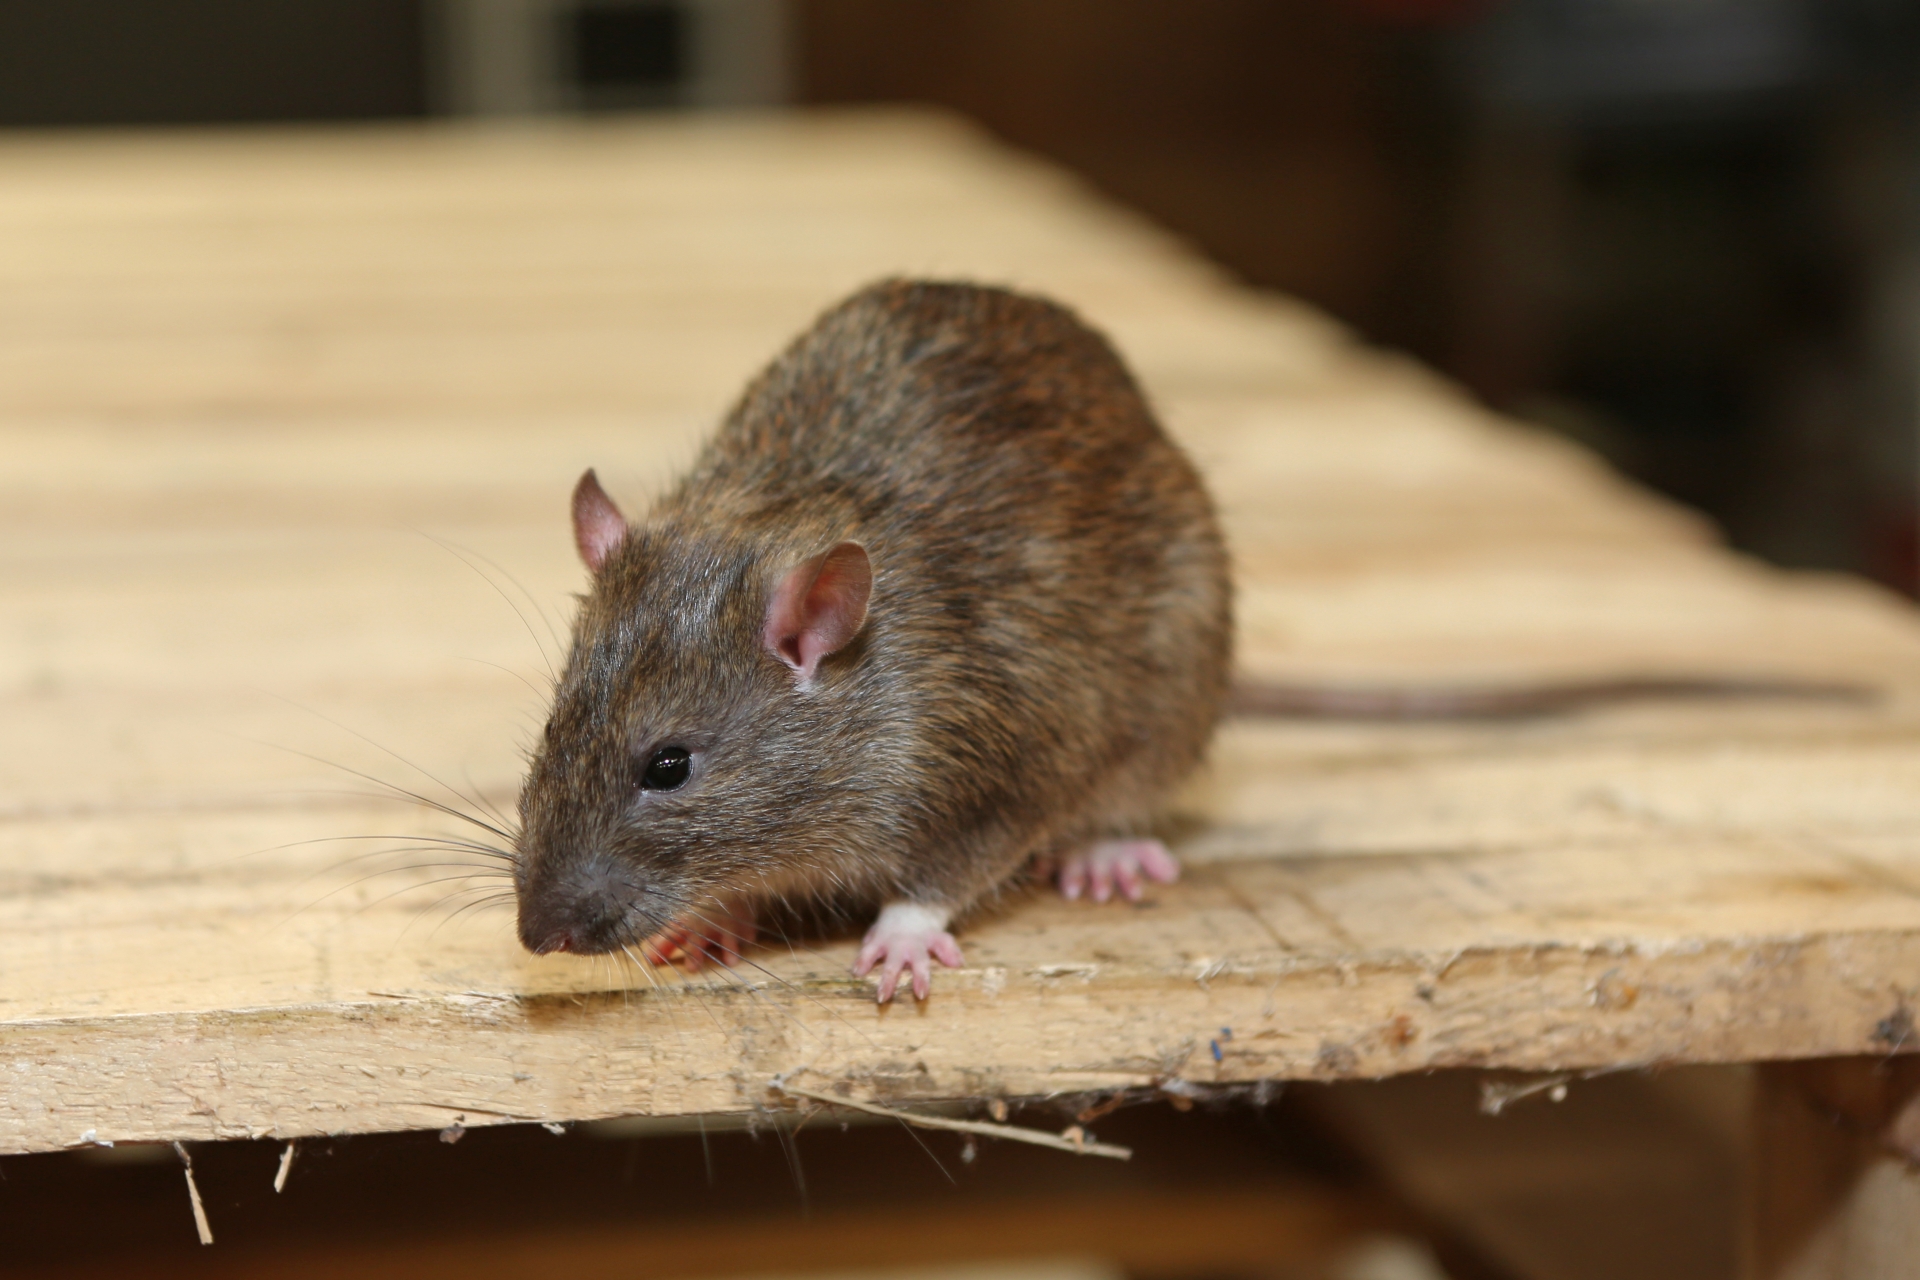 Rat Control, Pest Control in Mortlake, SW14. Call Now 020 8166 9746